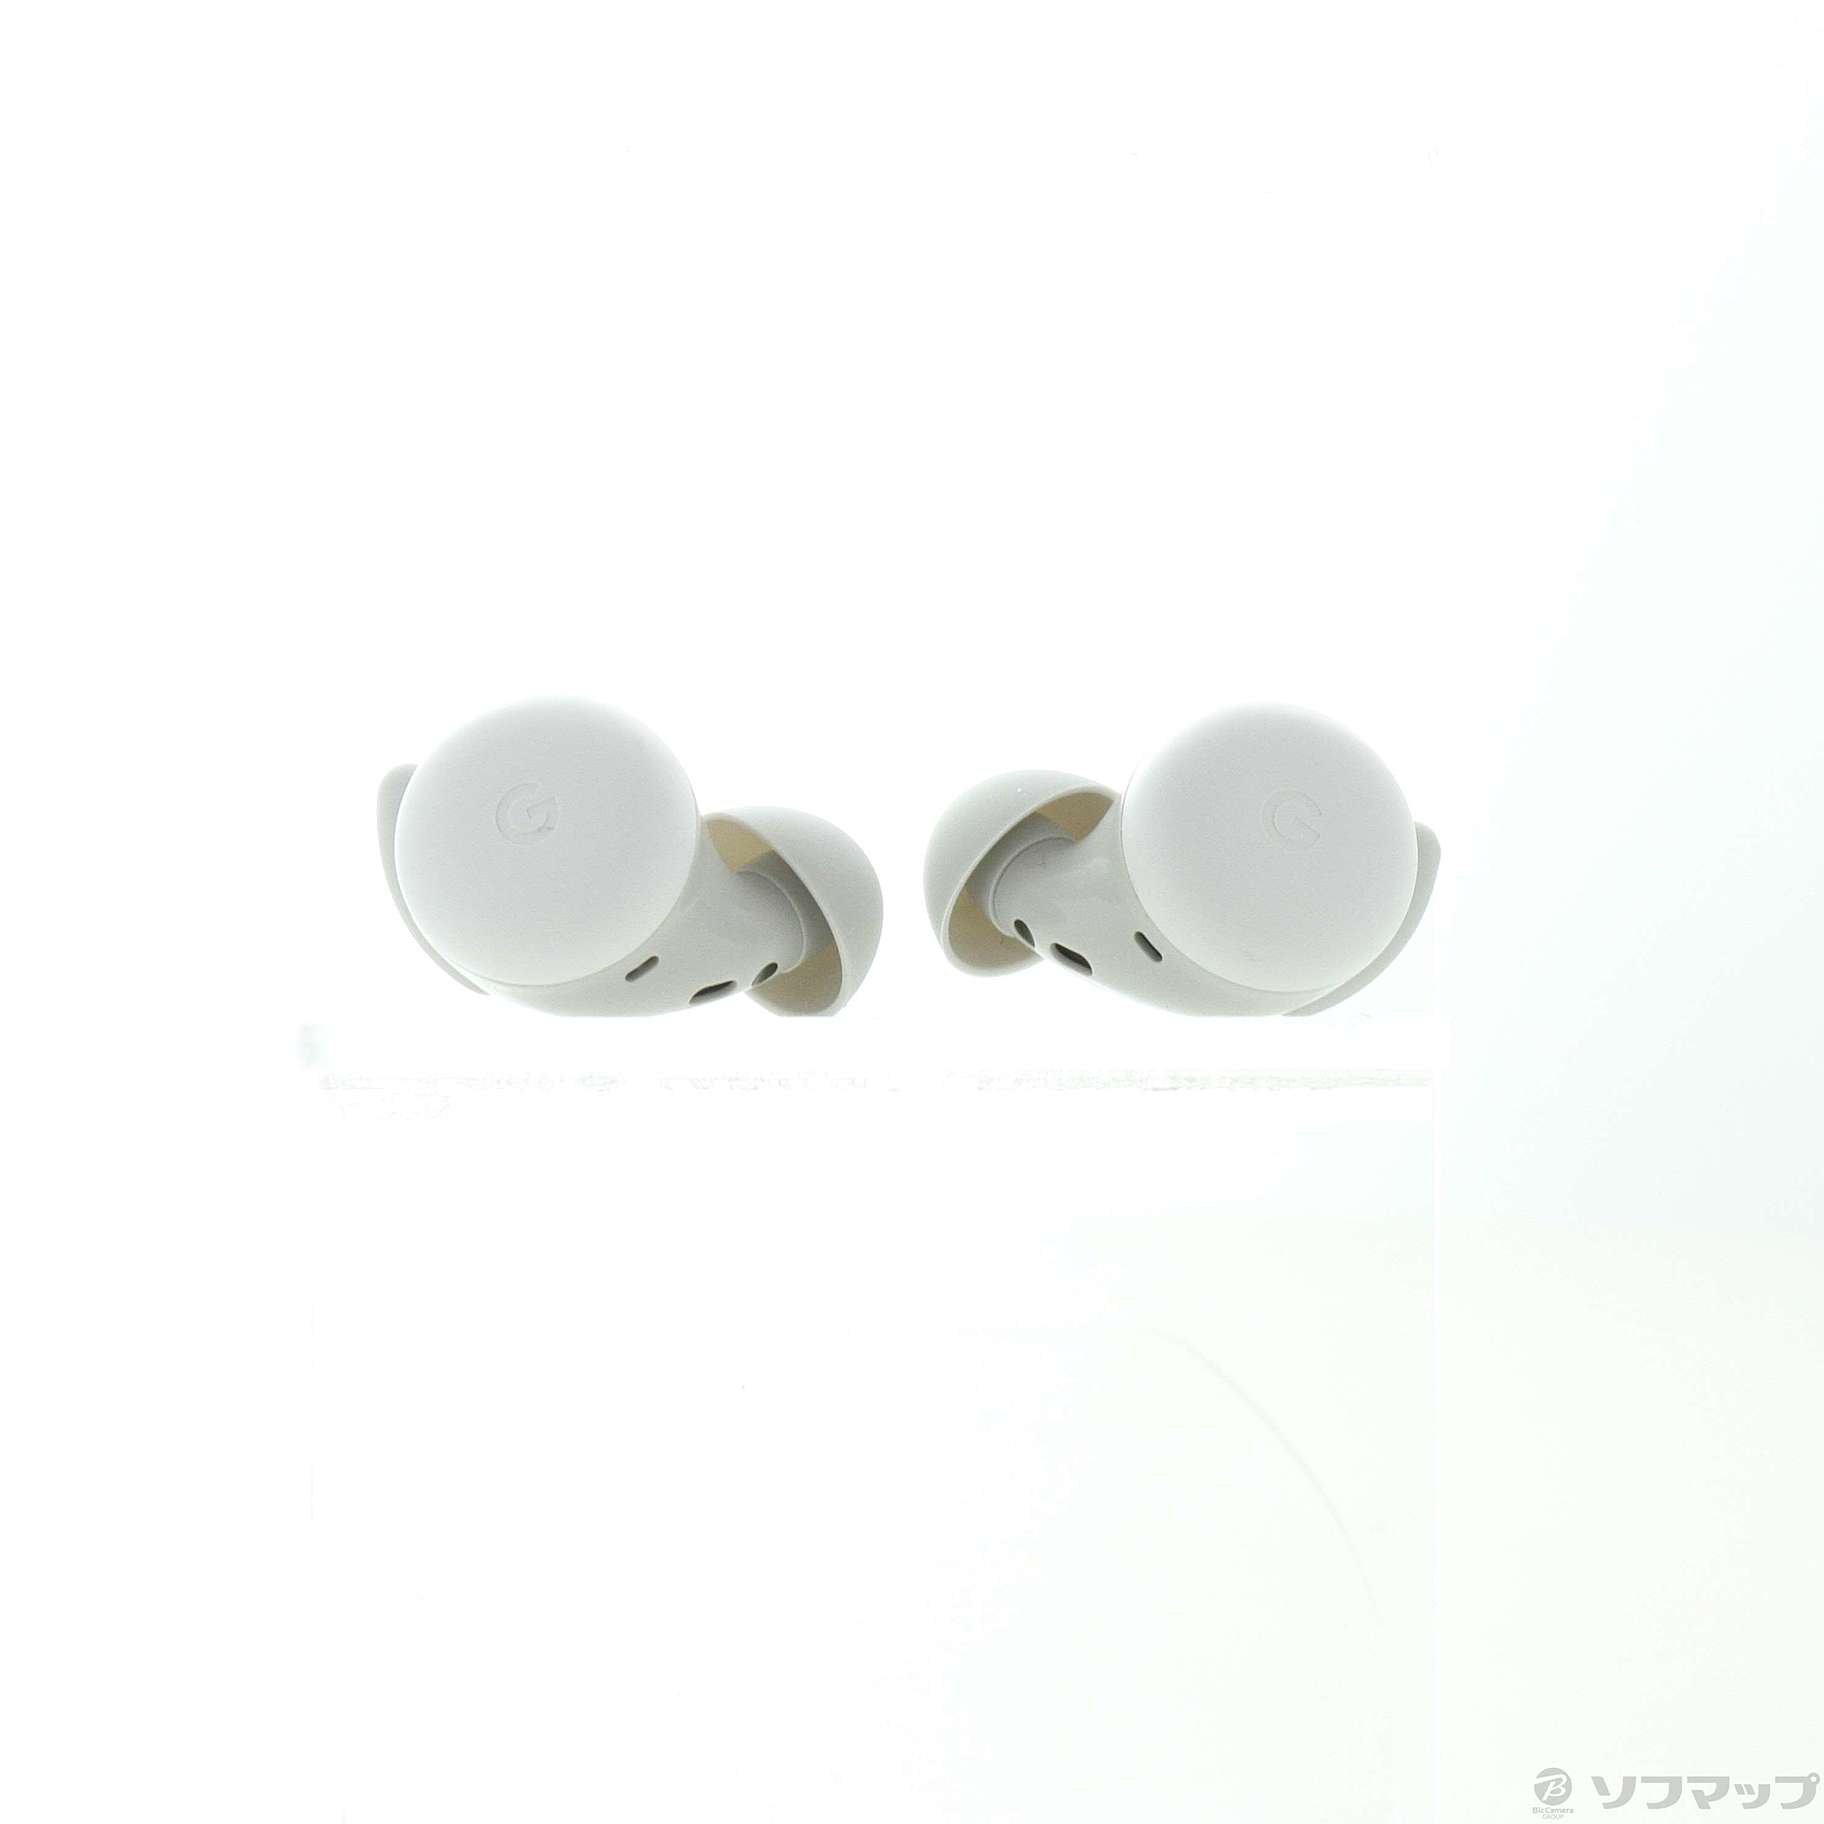 Pixel Buds A-Series Clearly White